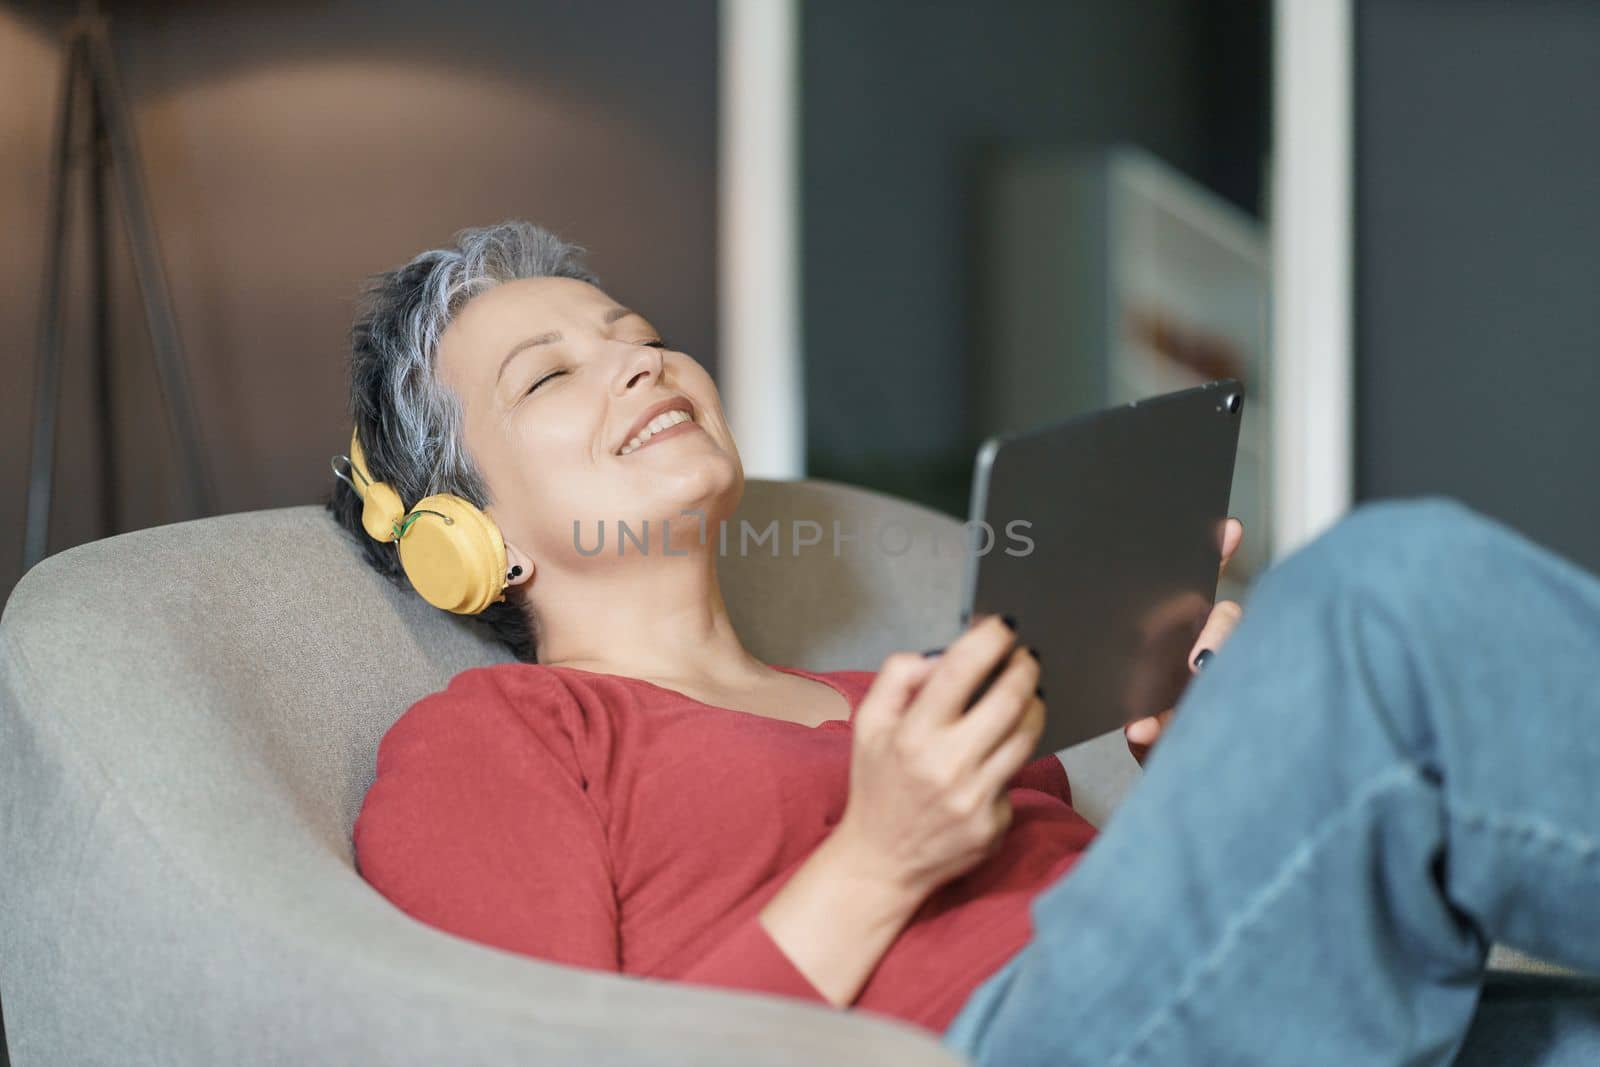 Mature woman with grey hair is depicted listening to music while sitting on sofa in her home. She has her eyes closed and is holding a tablet in her hands. by LipikStockMedia